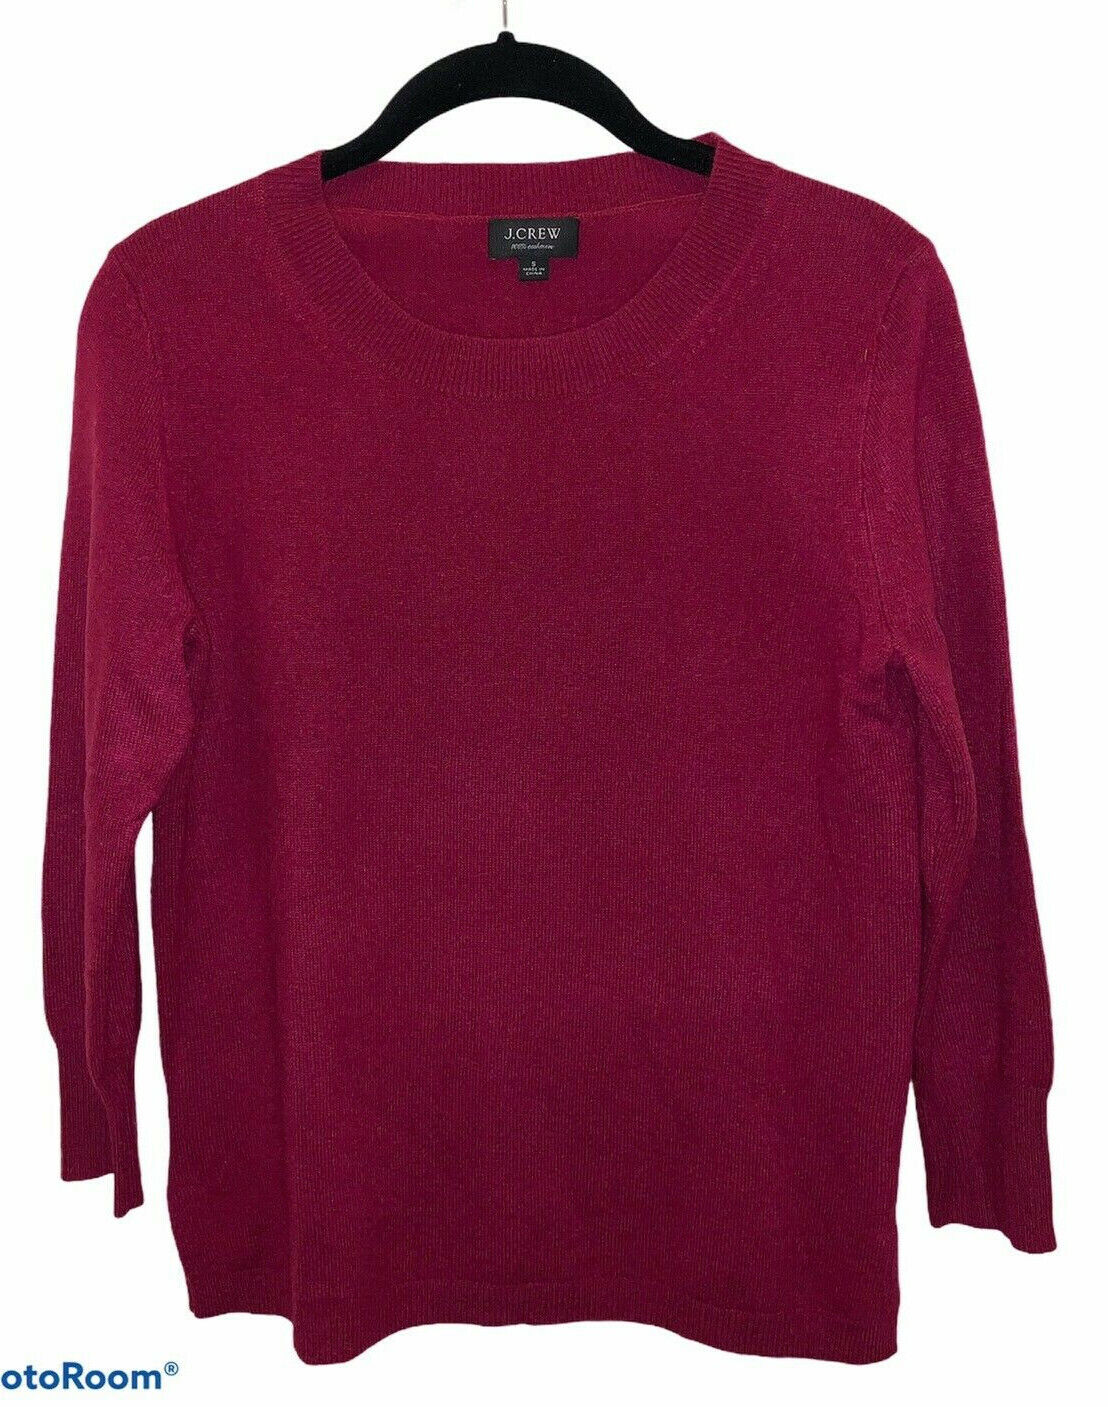 J Crew Womens Black Label Maroon 100% Cashmere 3/4 Sleeve Sweater Size Small